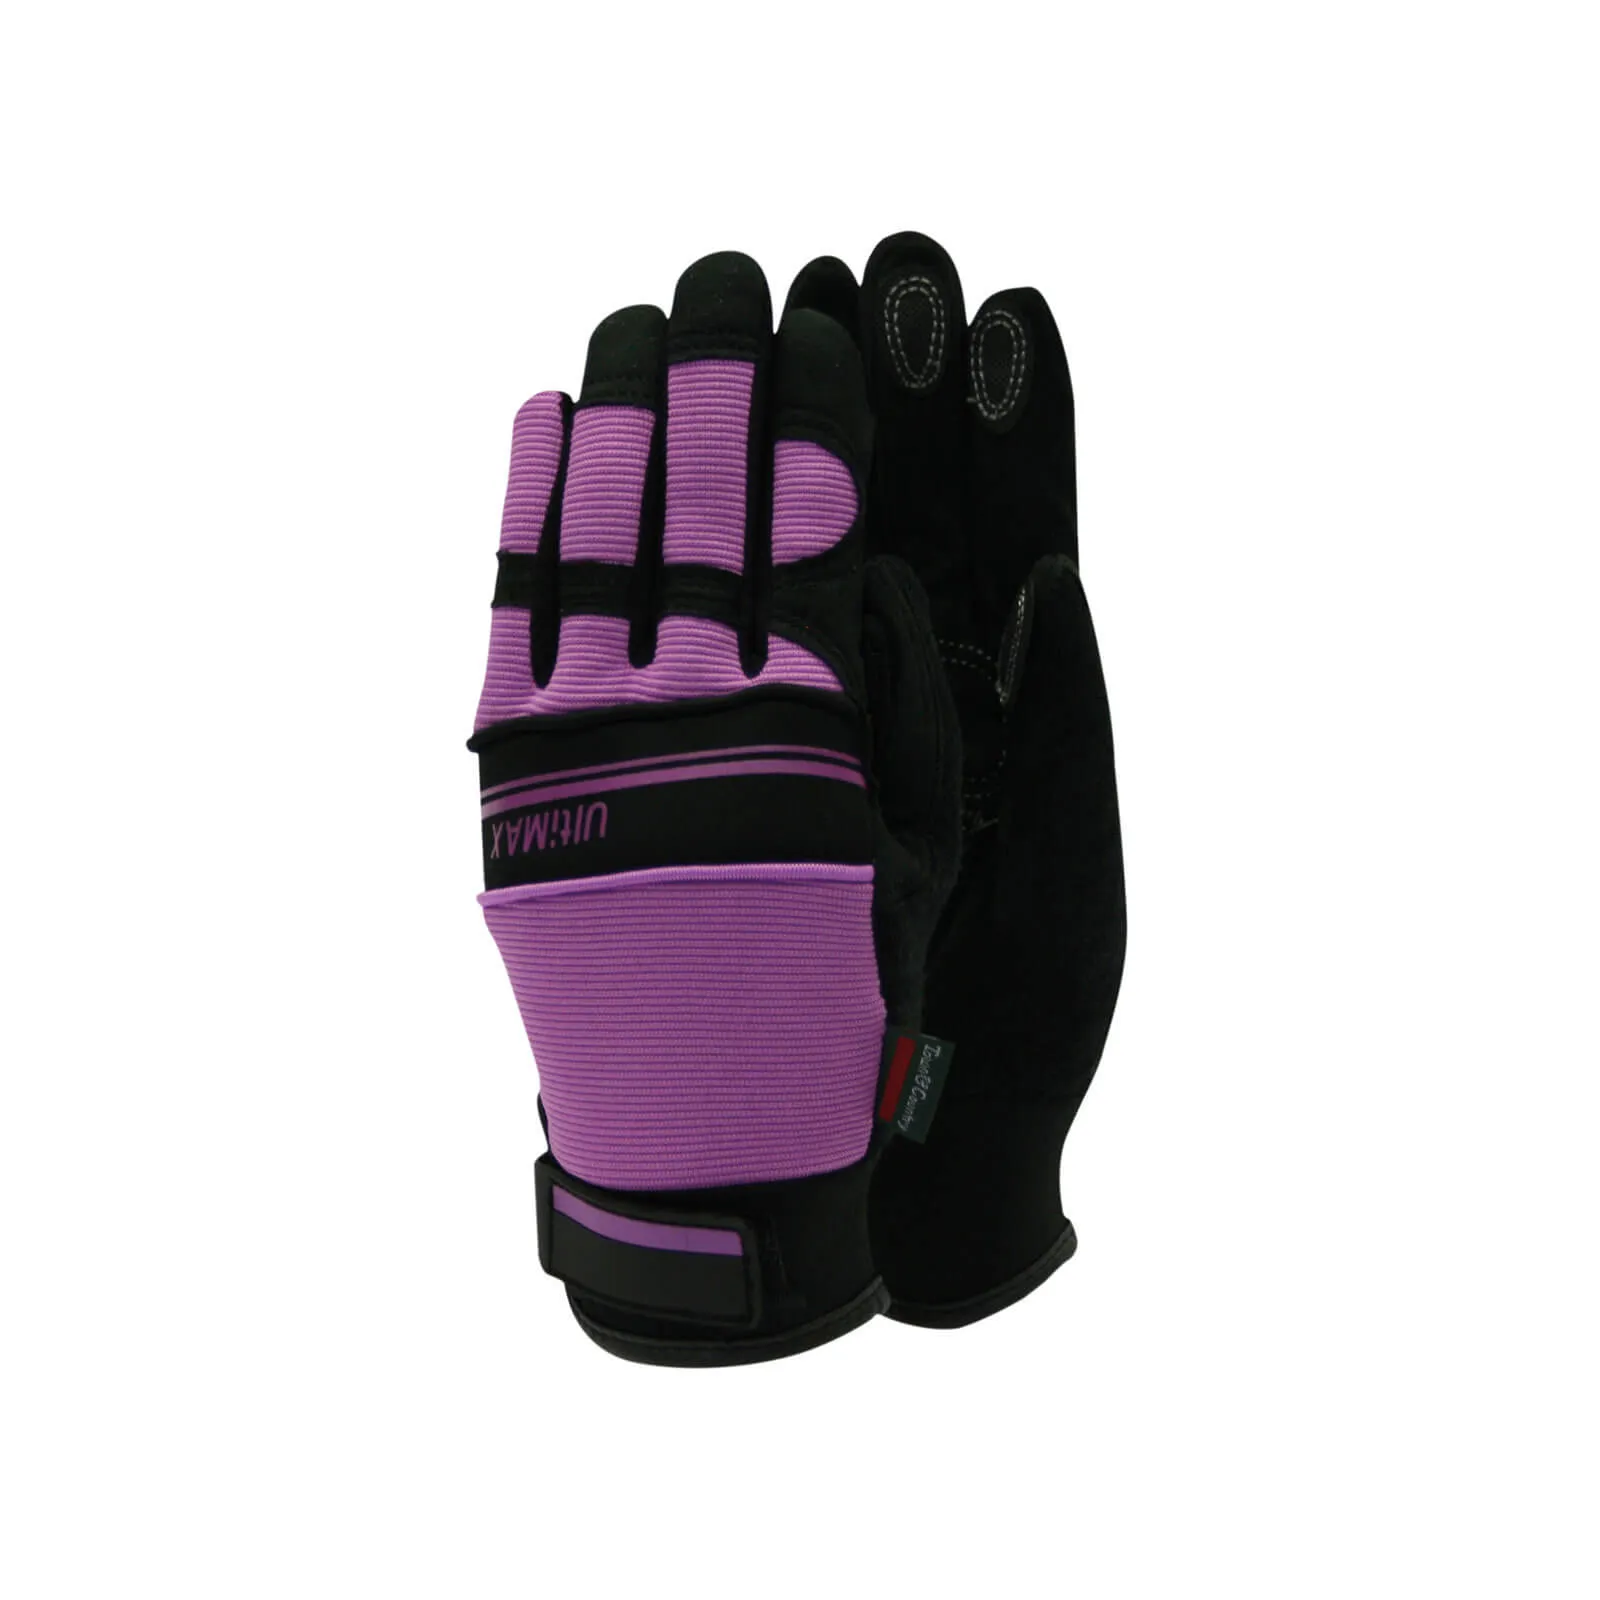 Town and Country Ultimax Ladies Gloves - M